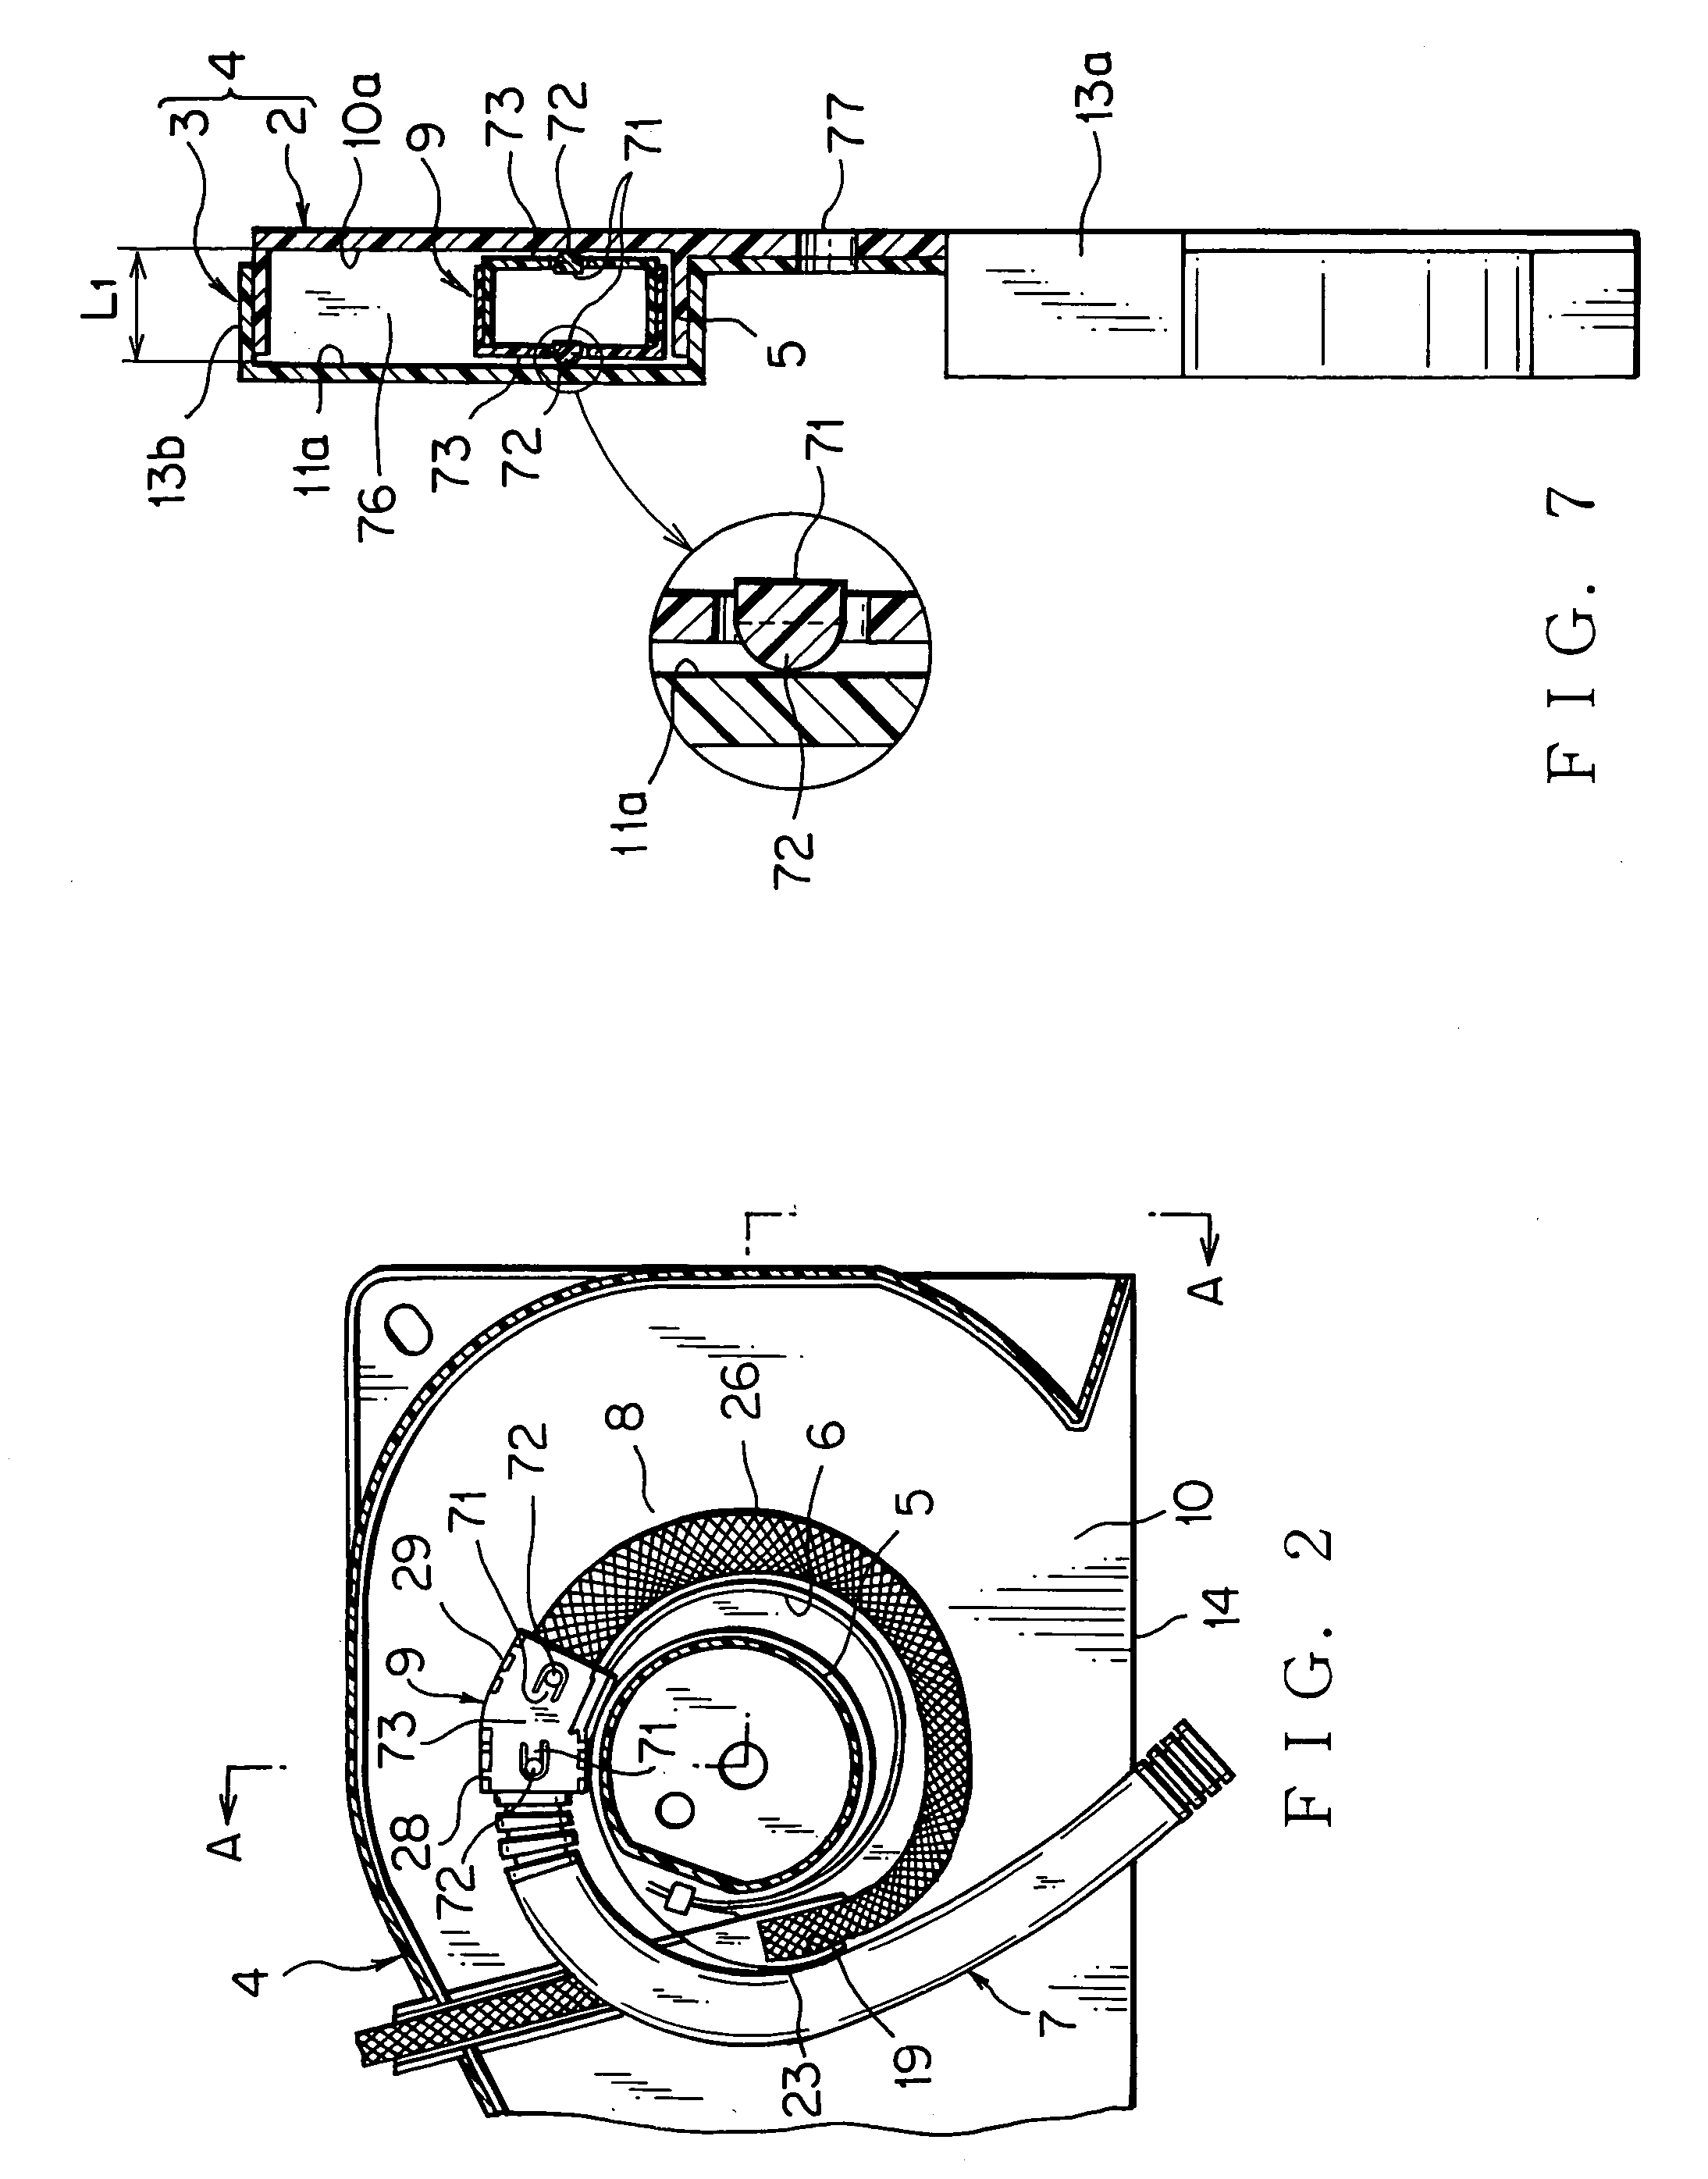 Continuous power supply device